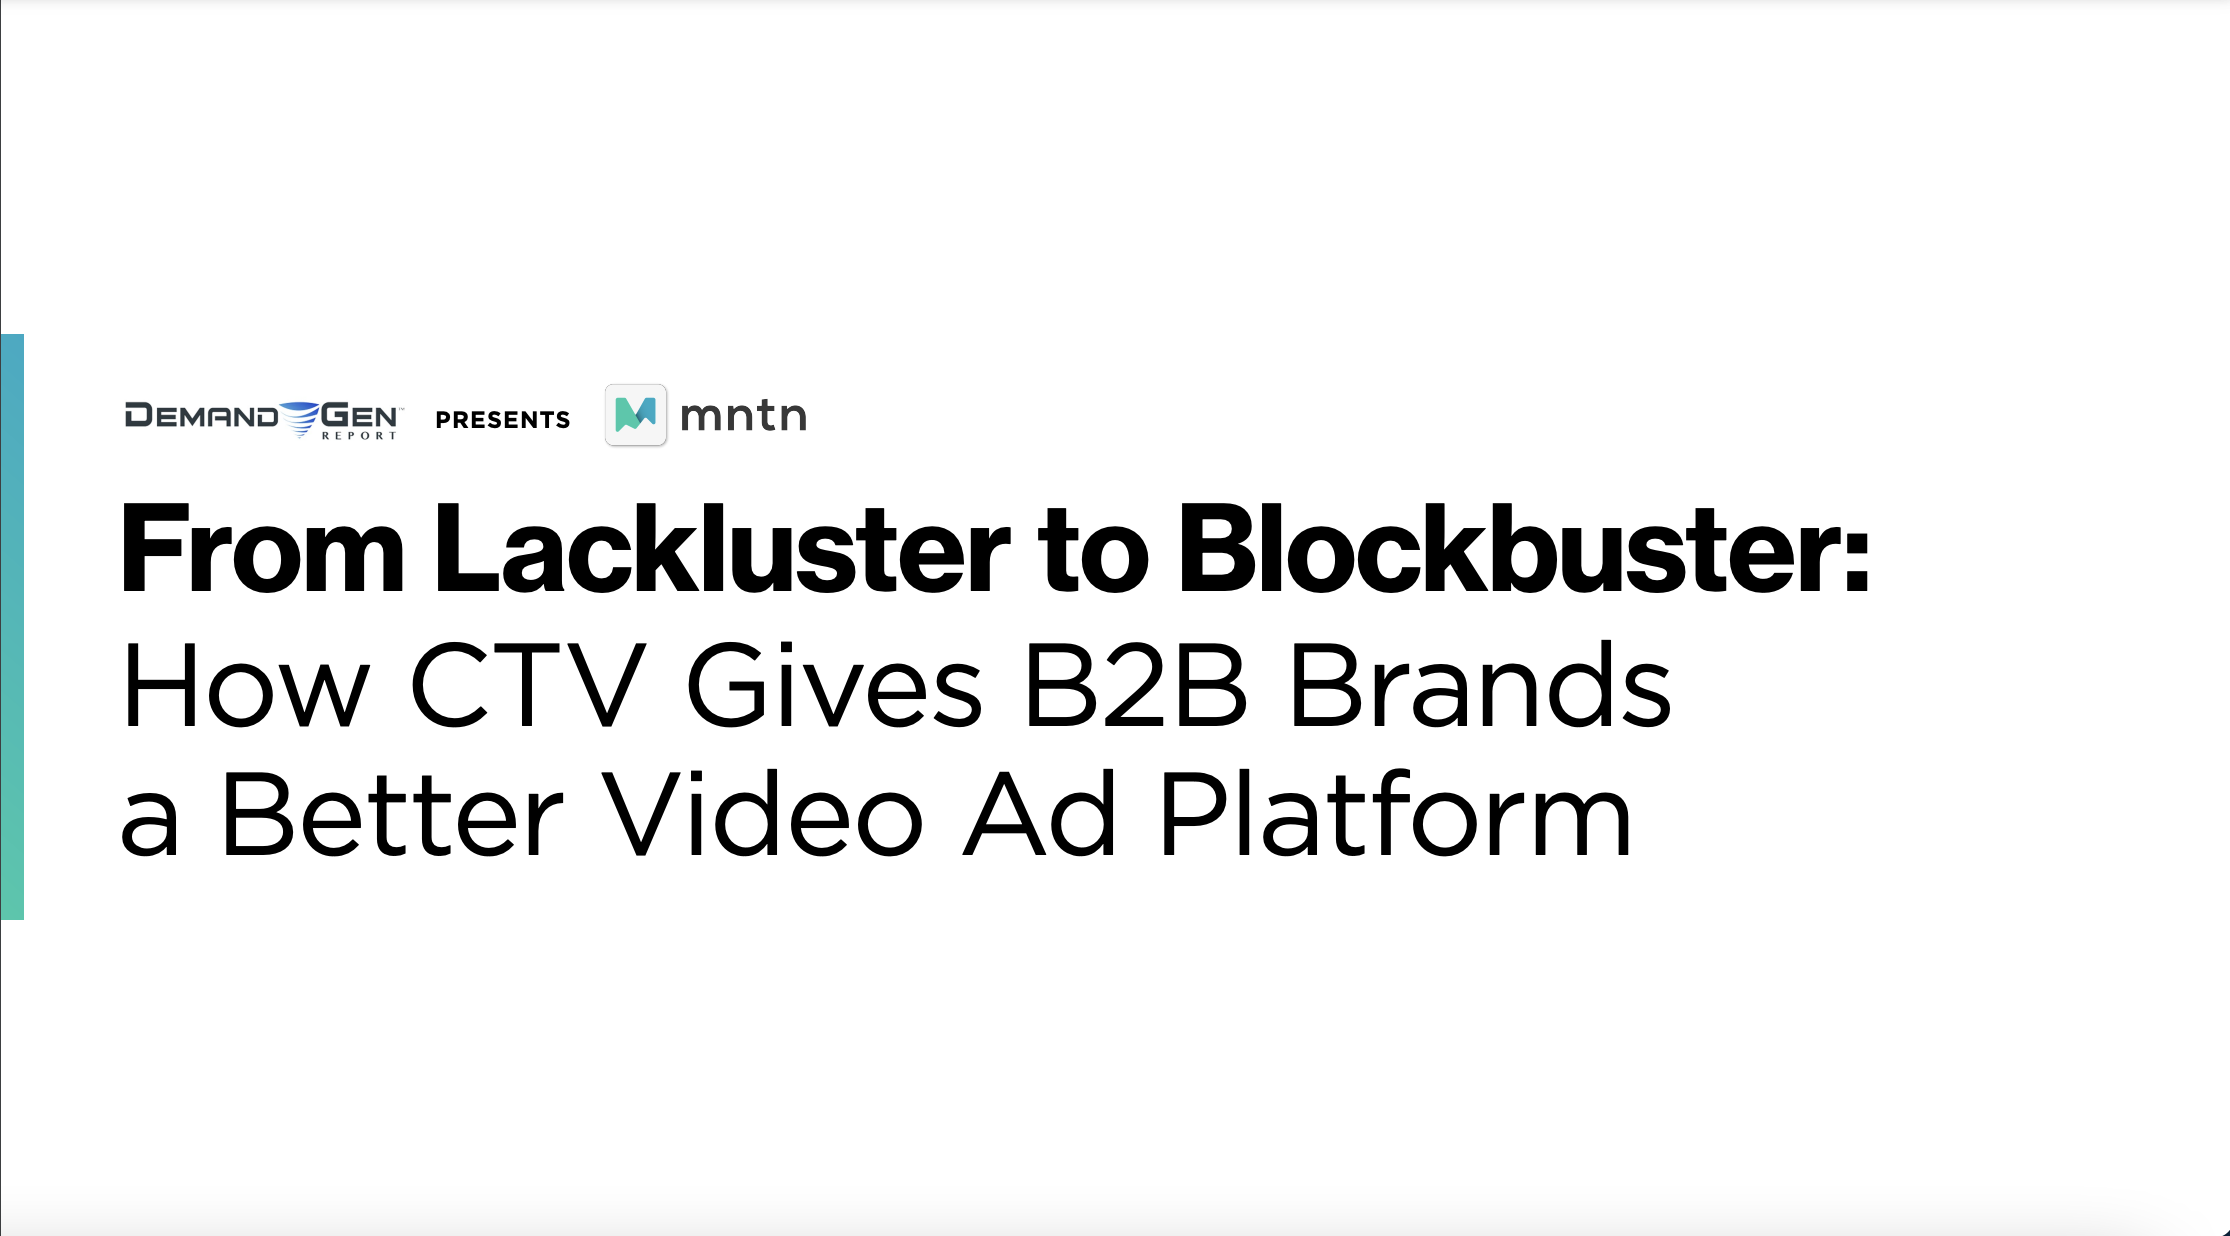 From Lackluster to Blockbuster: How CTV Gives B2B Brands a Better Video Ad Platform